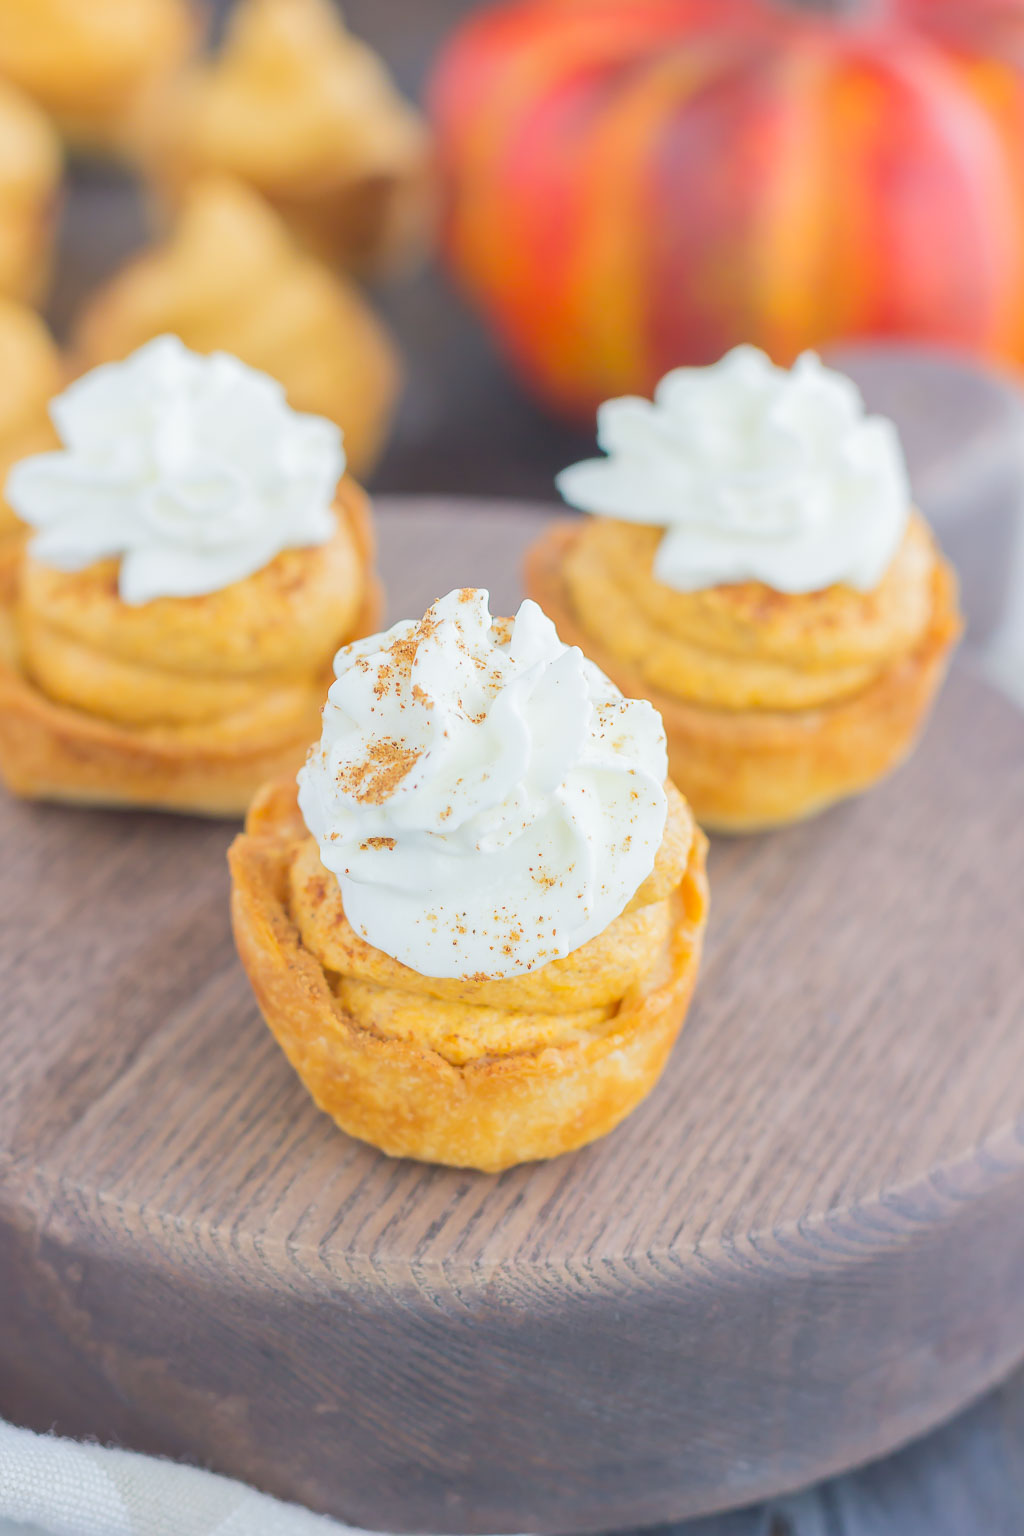 These Whipped Pumpkin Pie Bites are perfectly portable, poppable, and so easy to make. With just a few ingredients and hardly any prep time, you can have your pumpkin pie in bite-sized form! #pumpkin #pumpkinpie #pumpkinpiebites #pumpkinbites #piebites #pumpkinrecipe #fallrecipes #falldessert #pumpkindessert #dessert